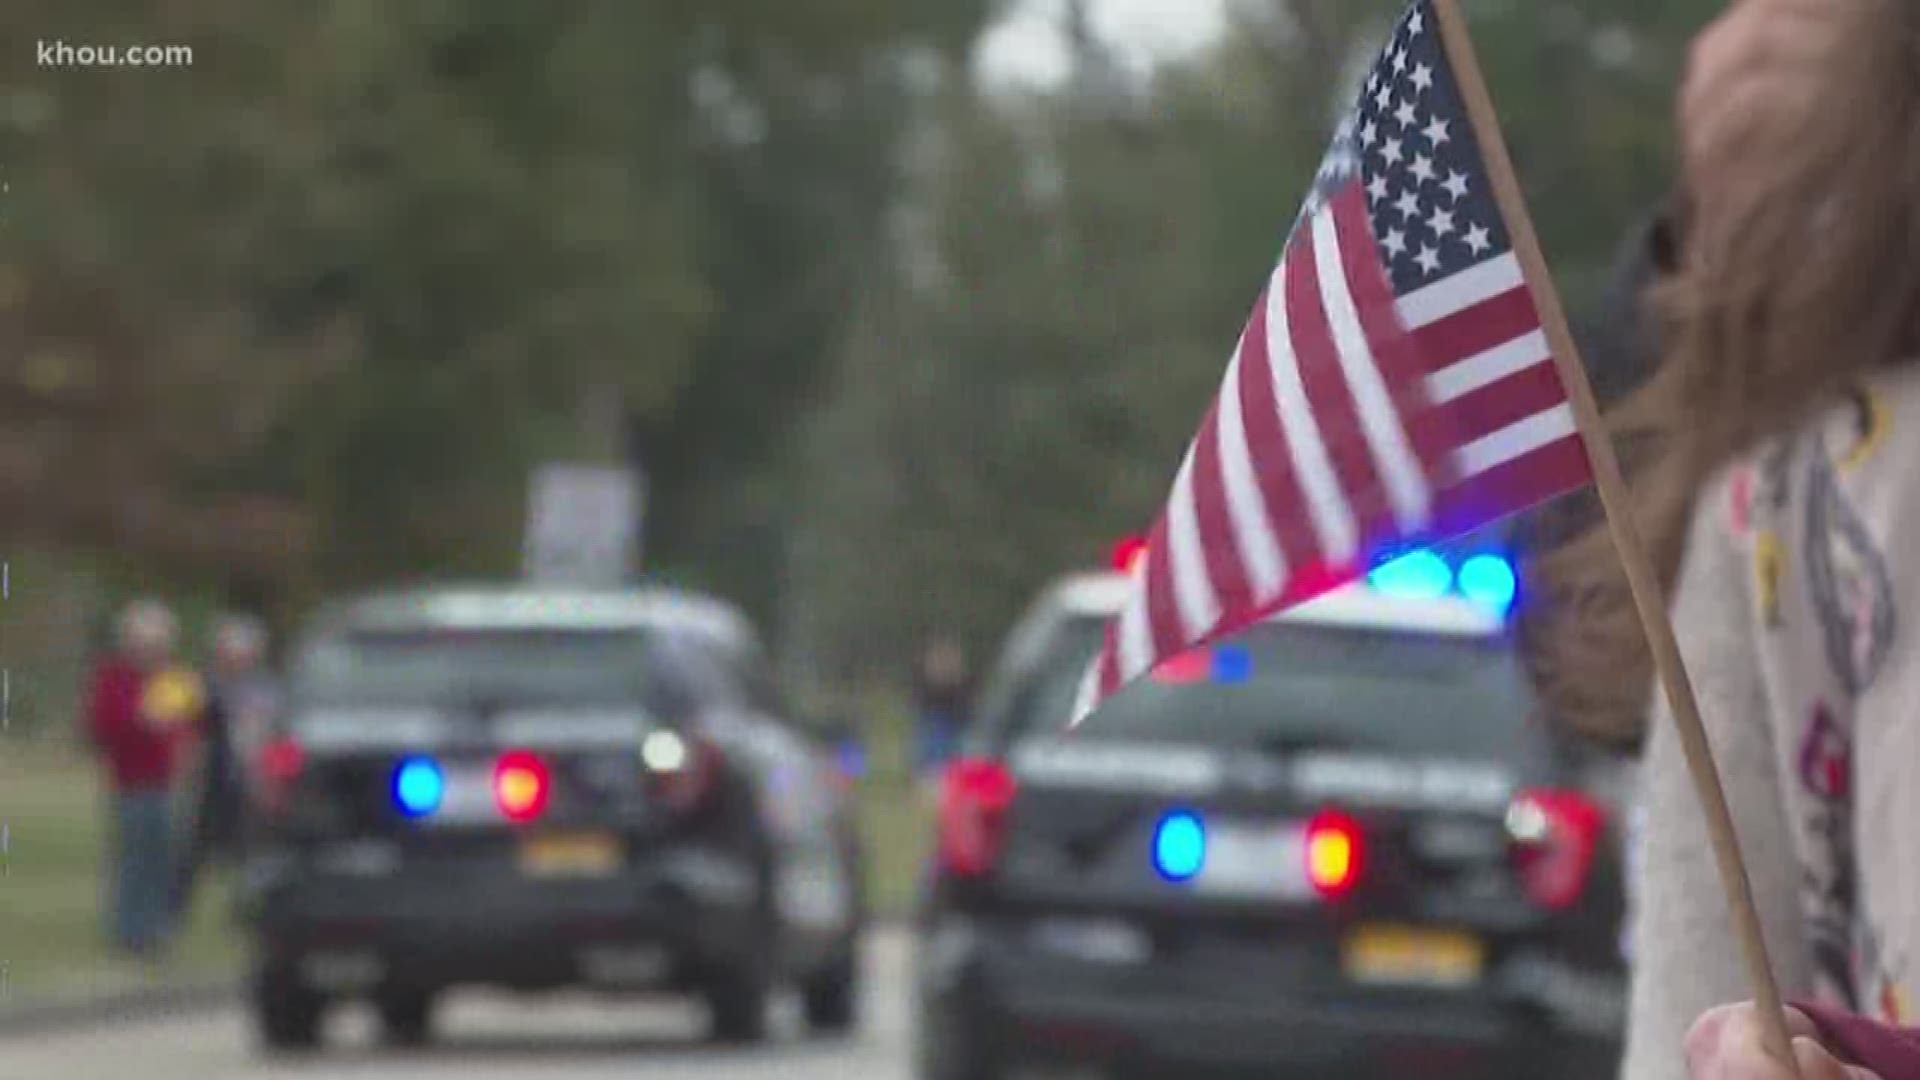 Hundreds stopped at Memorial Park to watch the President Bush's motorcade go by, moments after it left St. Martin?s Episcopal Church Thursday. Todd Lewis arrived early with a large American flag. He wanted to make sure he was in position to say good-bye t